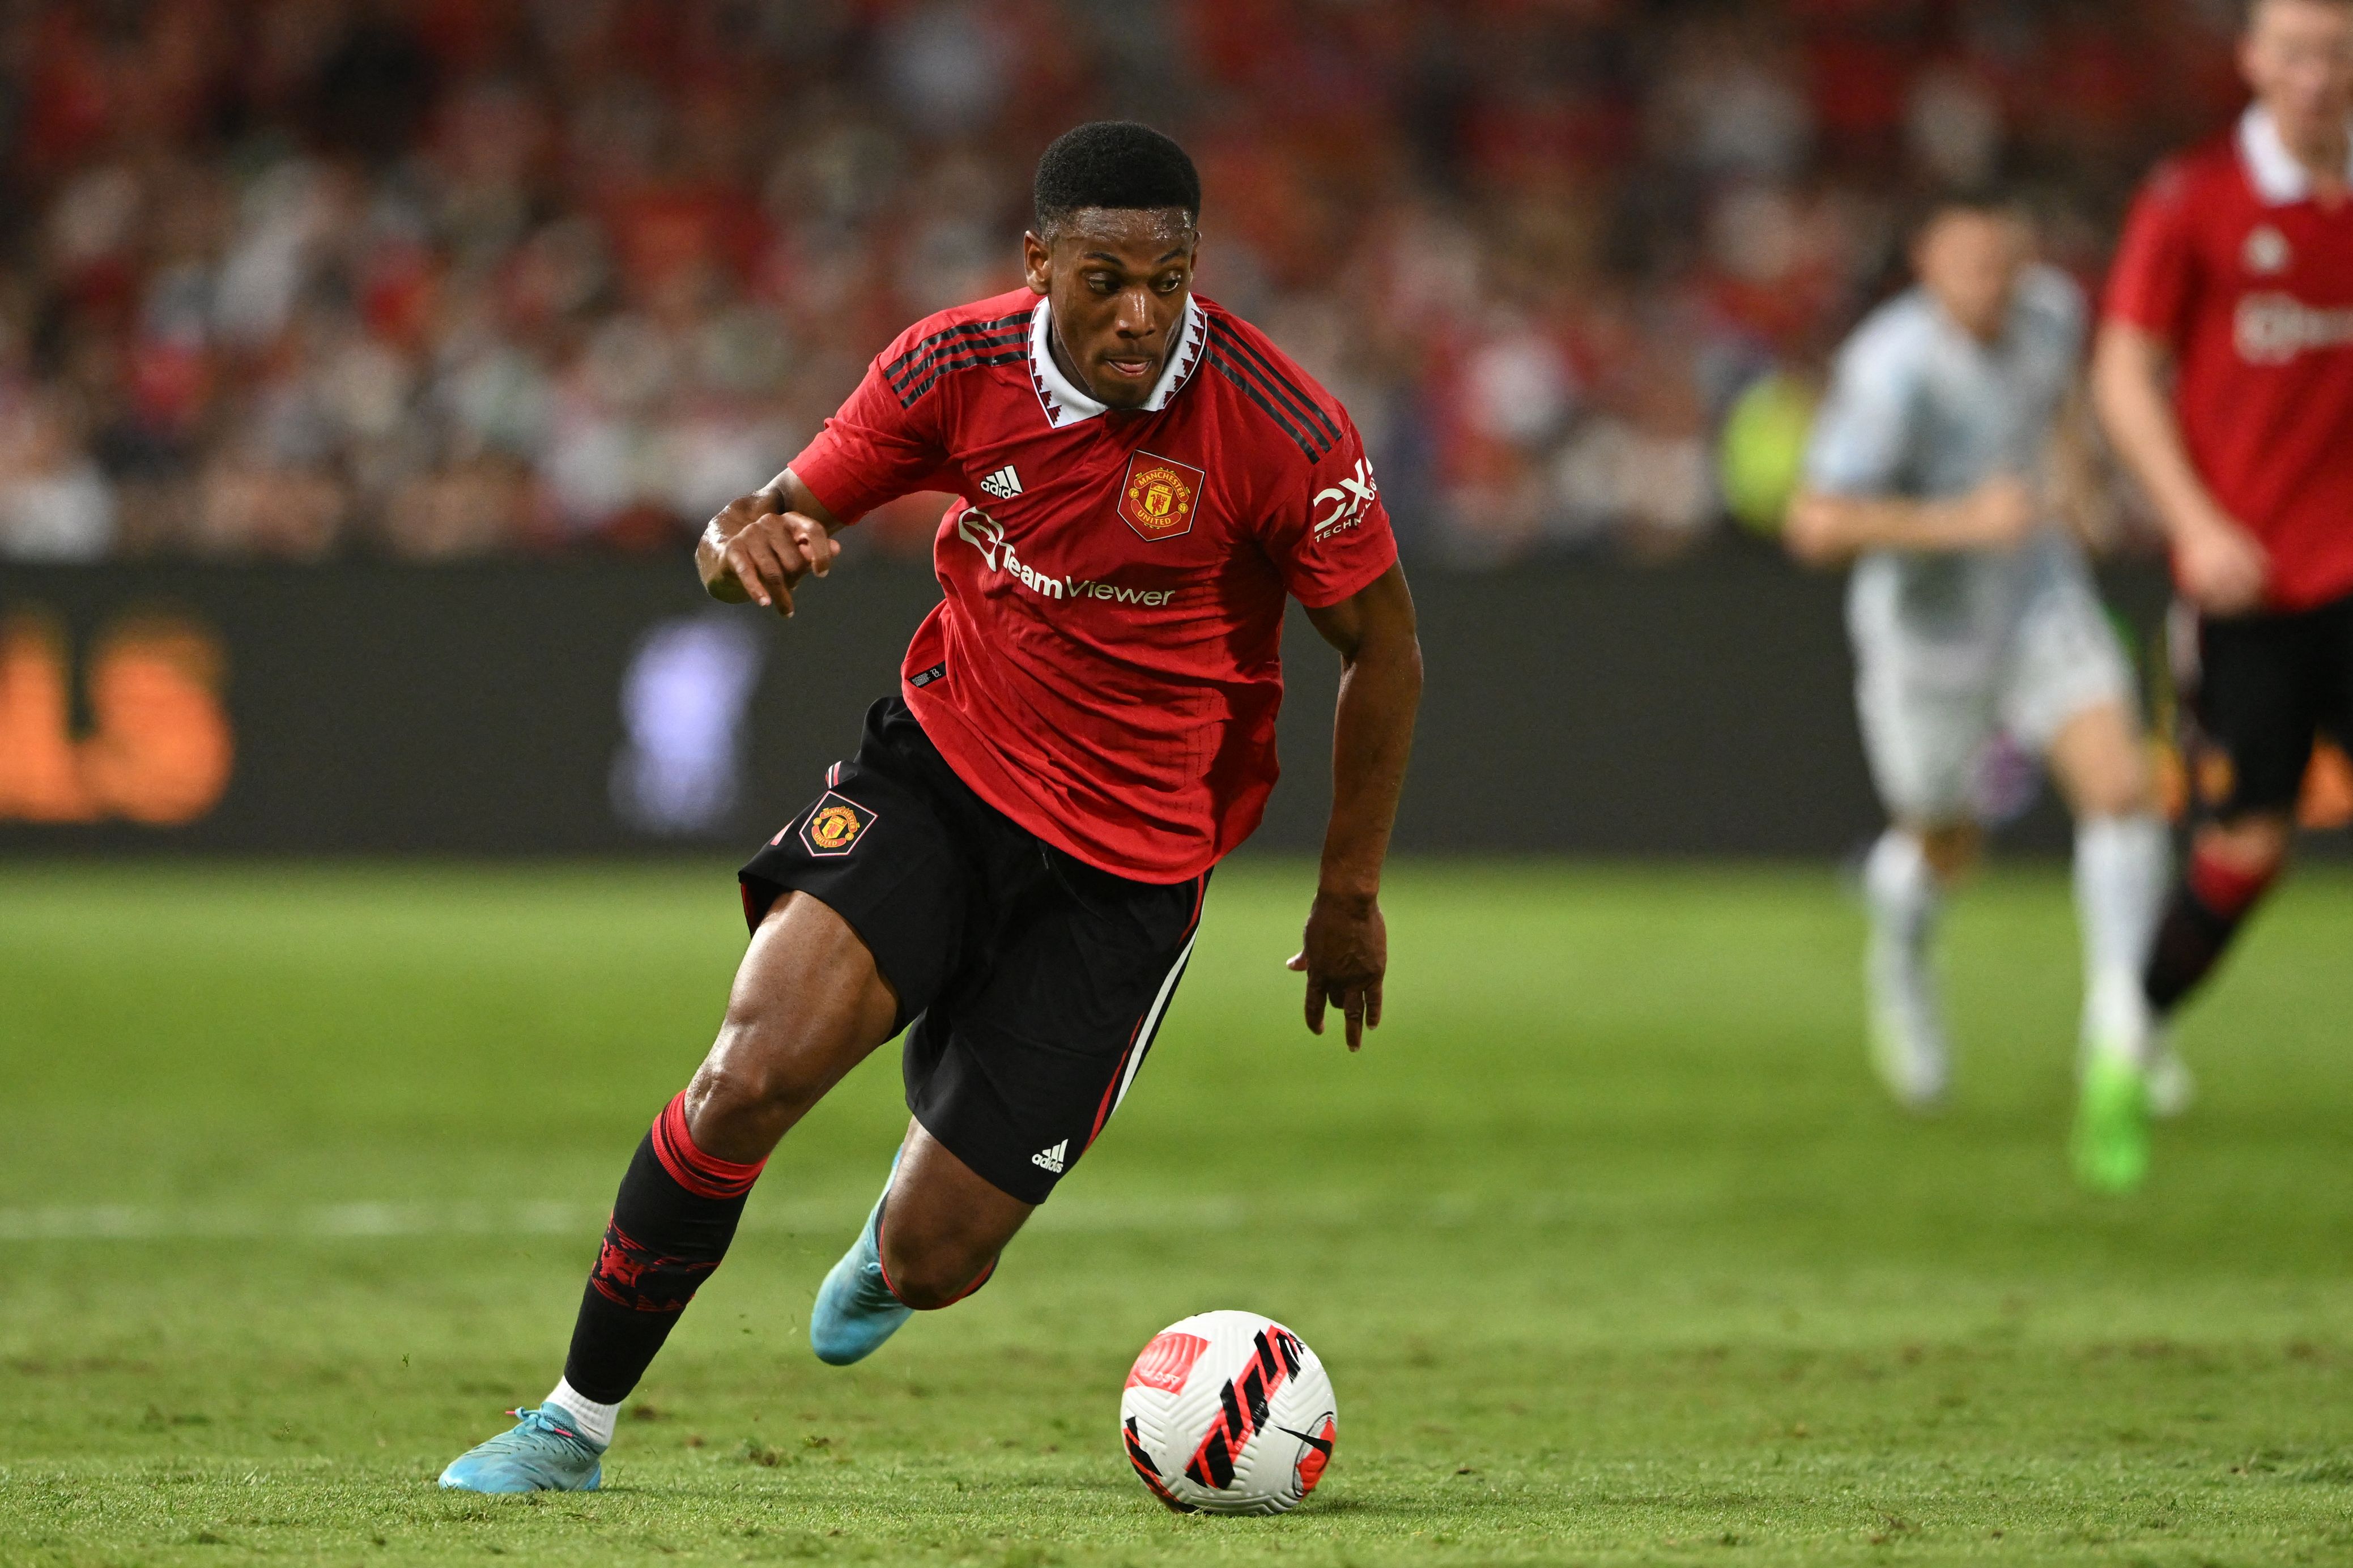 Does Anthony Martial deserve another chance at Manchester United?